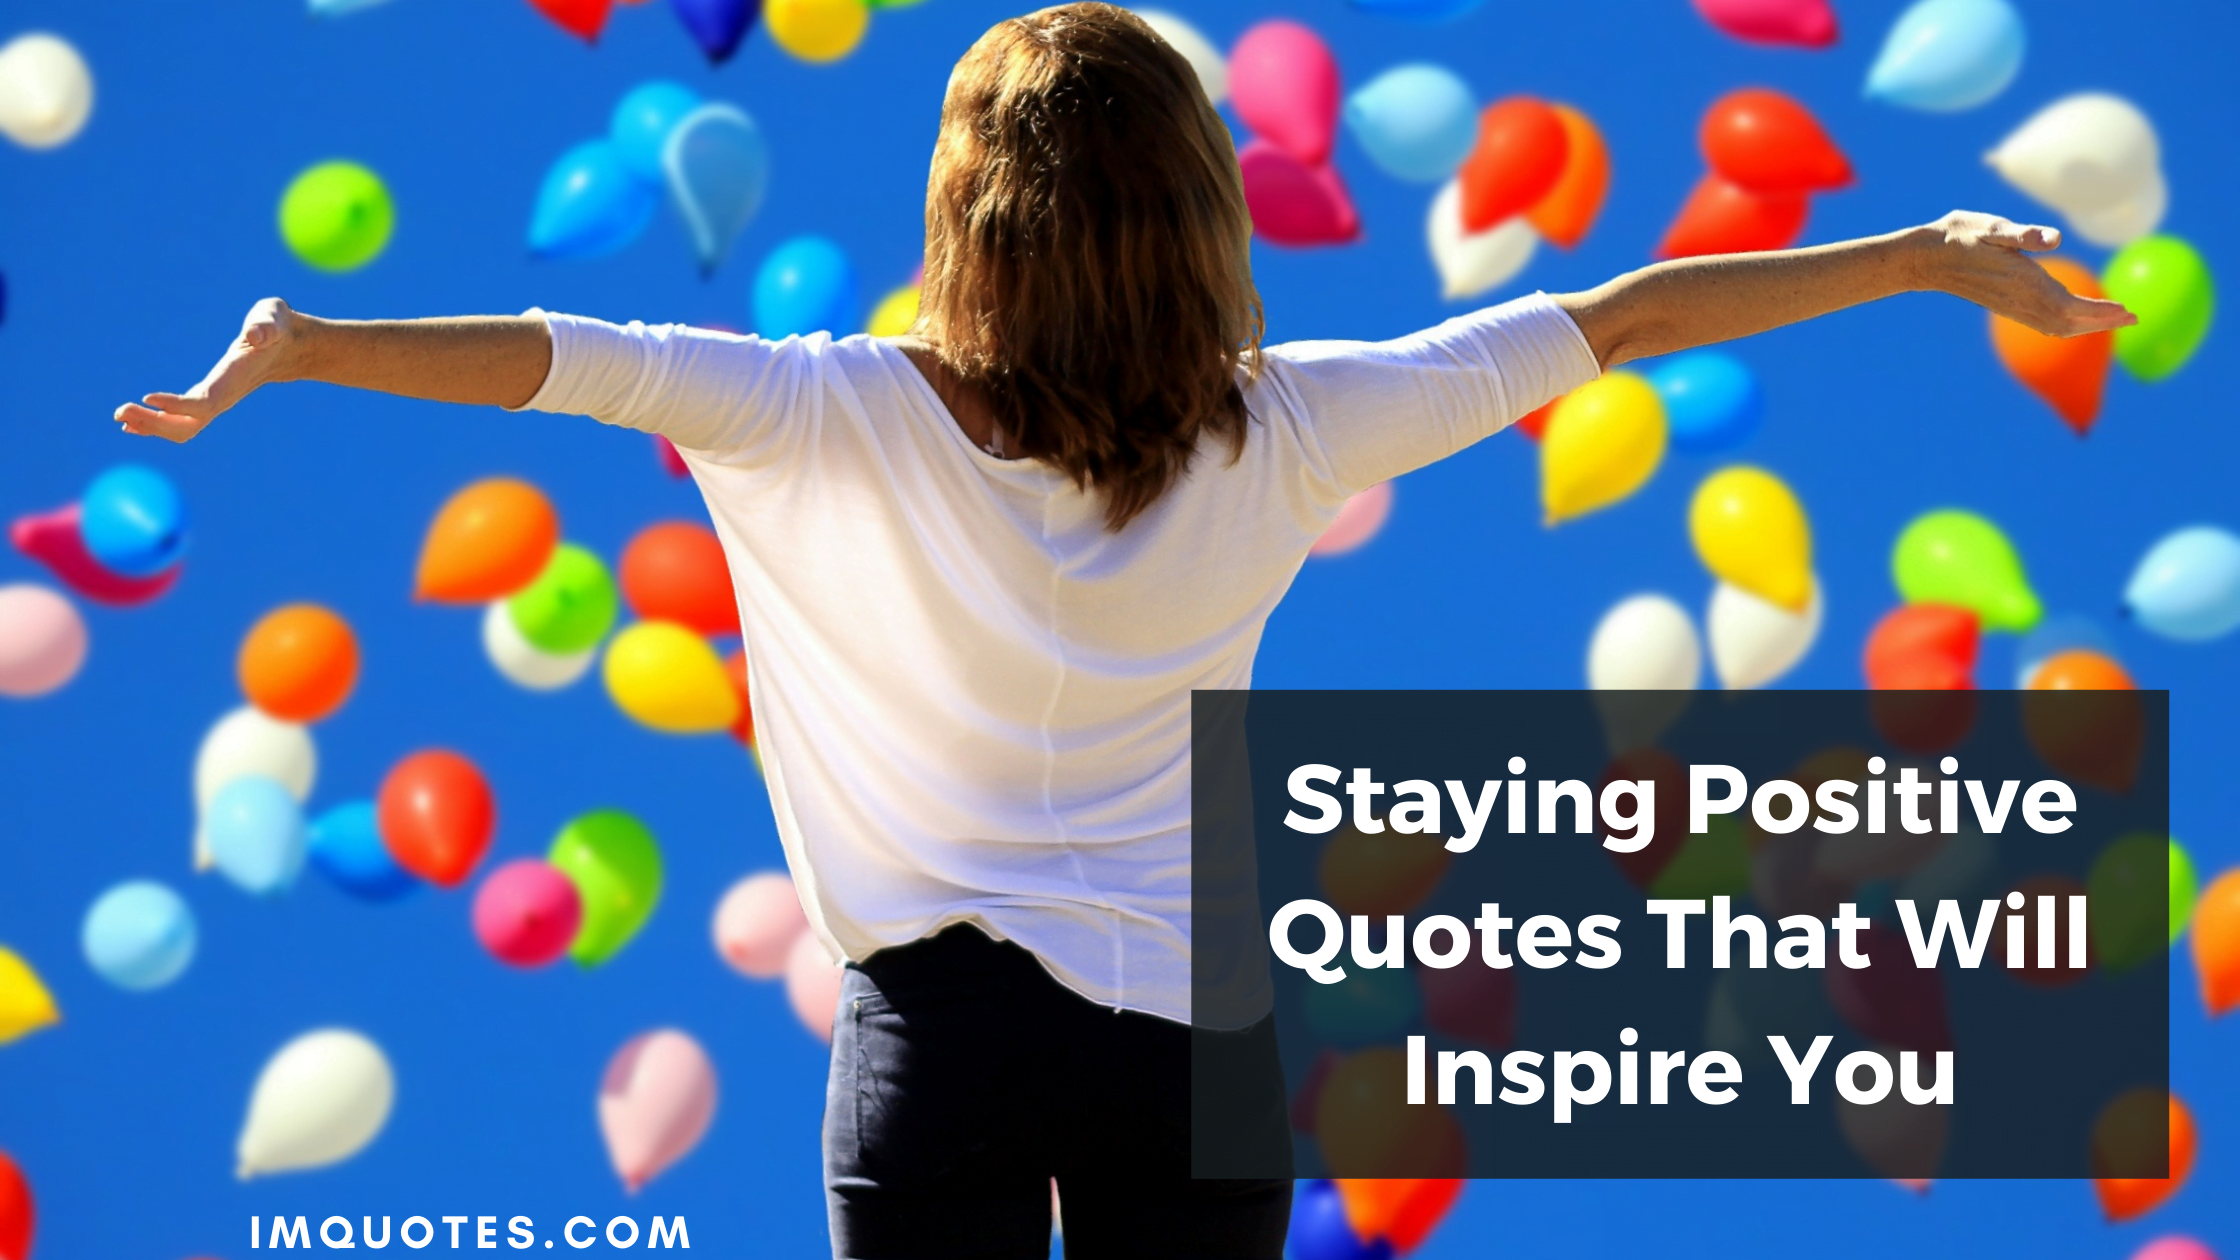 Staying Positive Quotes That Will Inspire You1